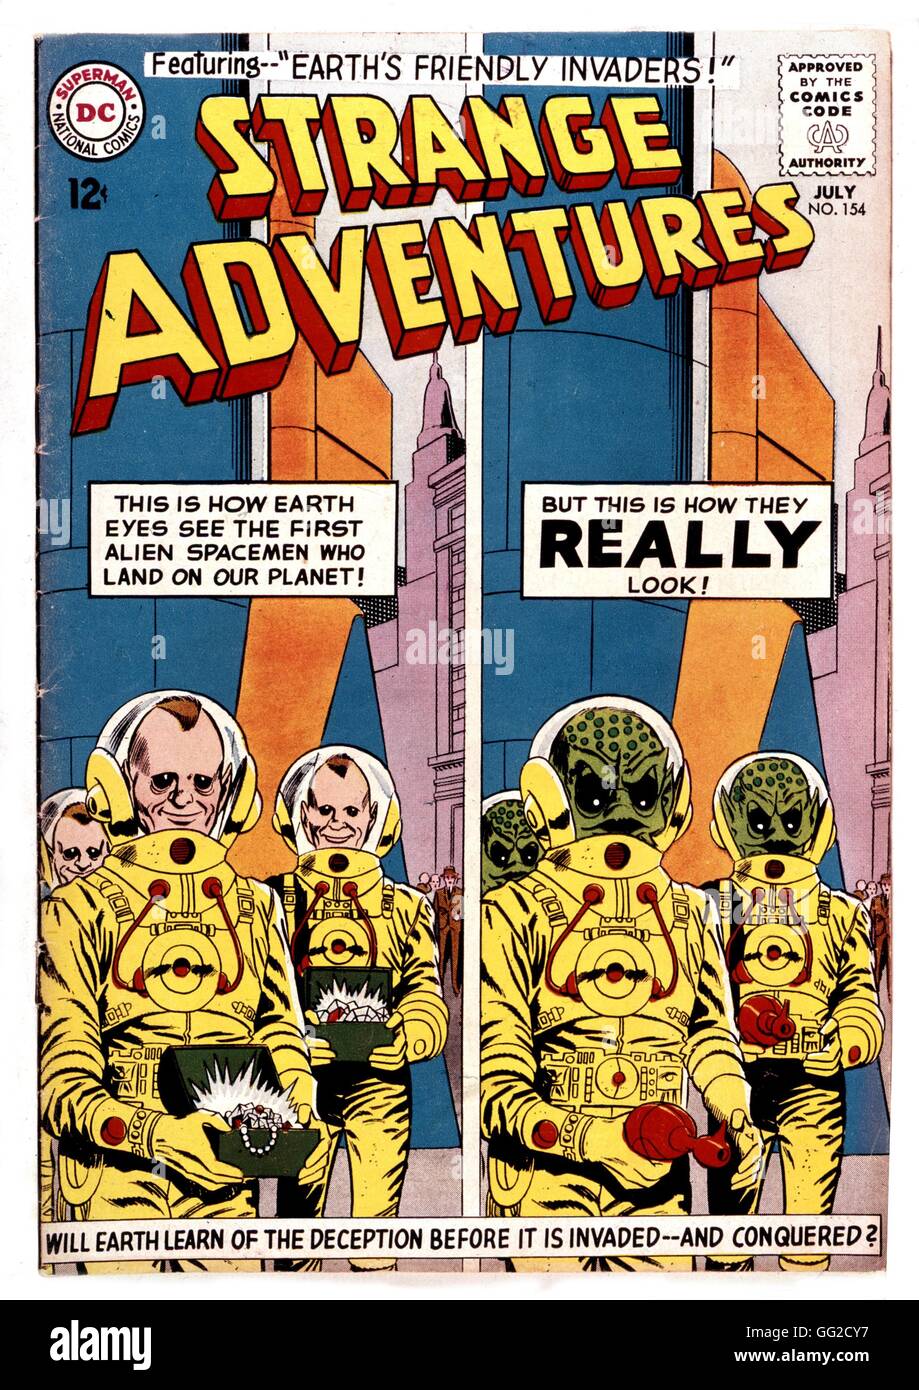 Cover of the comic strip 'Strange adventures', The invaders 20th century France Private collection Stock Photo